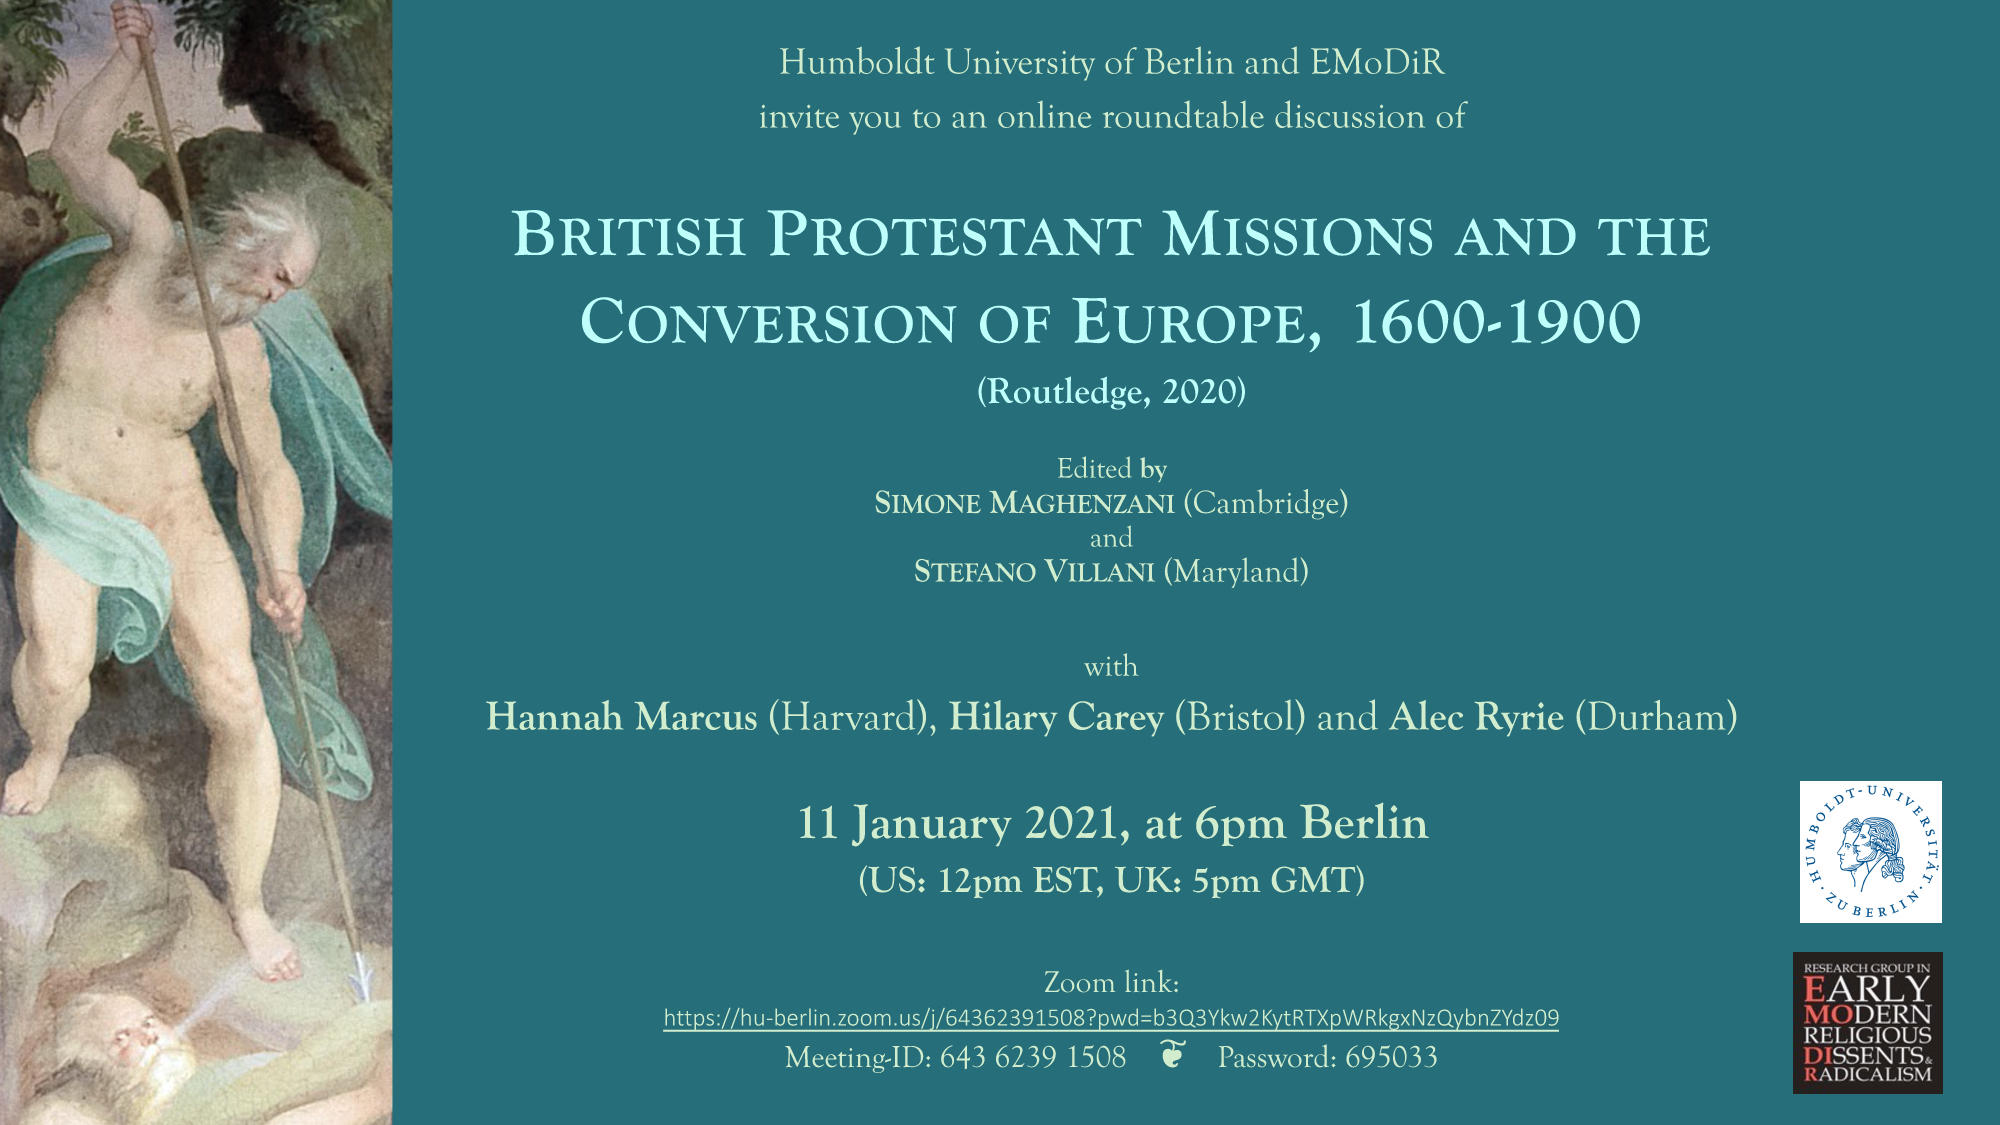 Roundtable Discussion: British Protestant Missions and the Conversion of Europe, 1600-1900